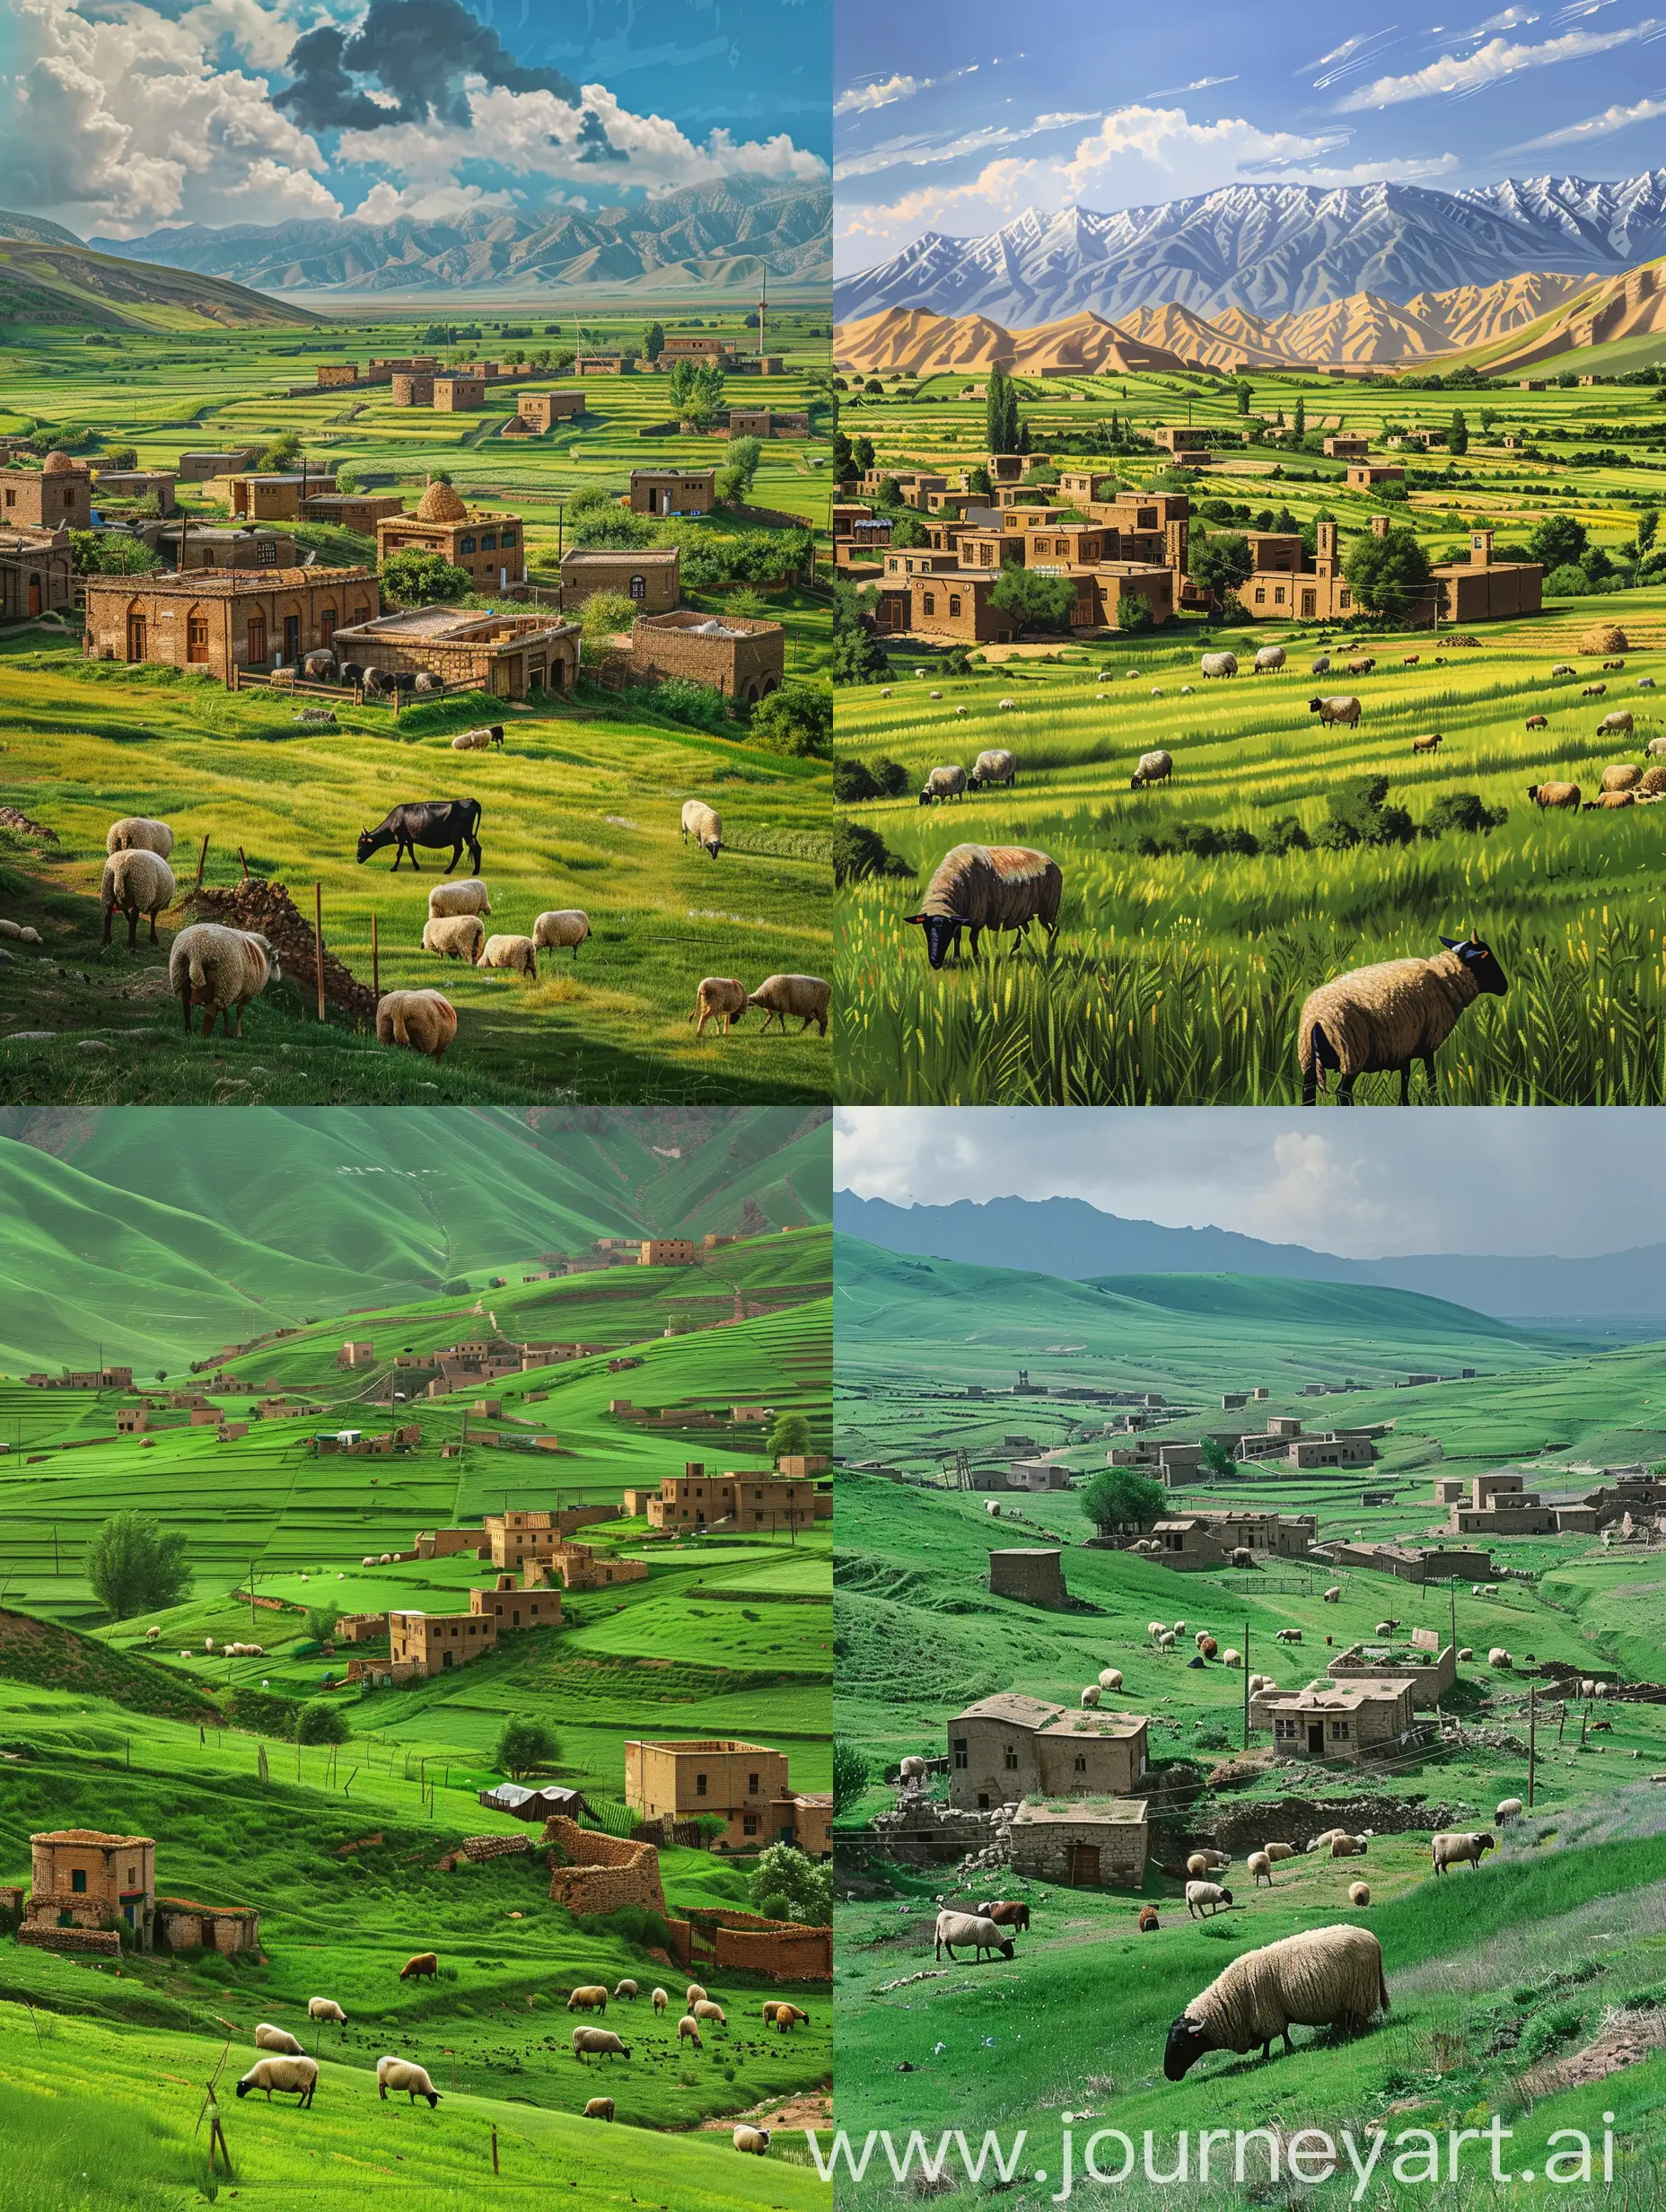 Scenic-Iranian-Village-Surrounded-by-Lush-Green-Fields-with-Grazing-Sheep-and-Cows